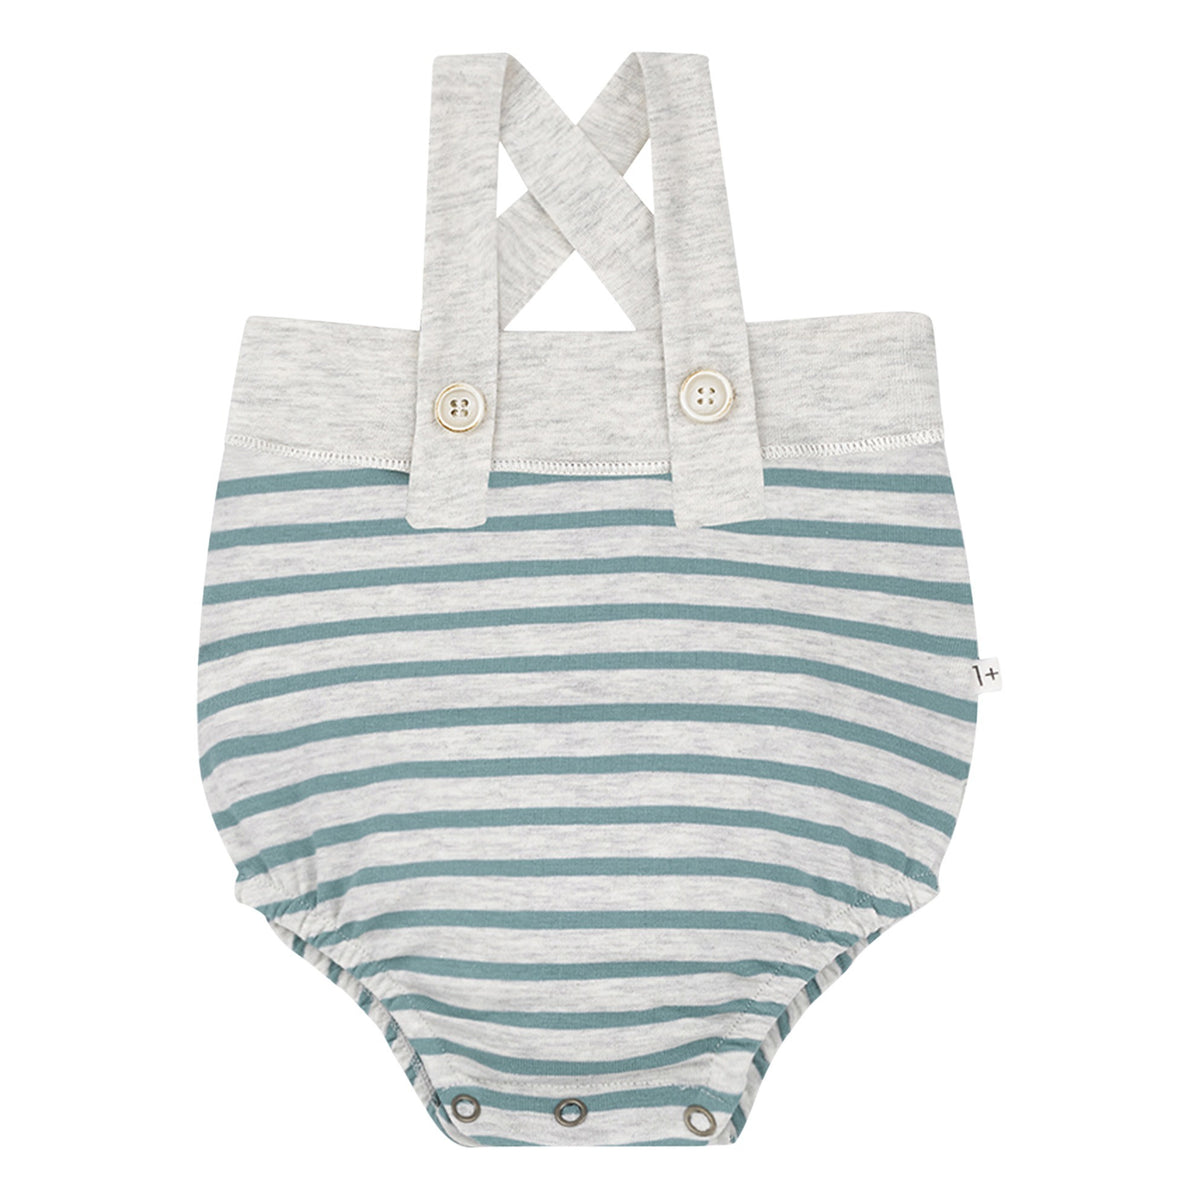 White and green striped baby romper 